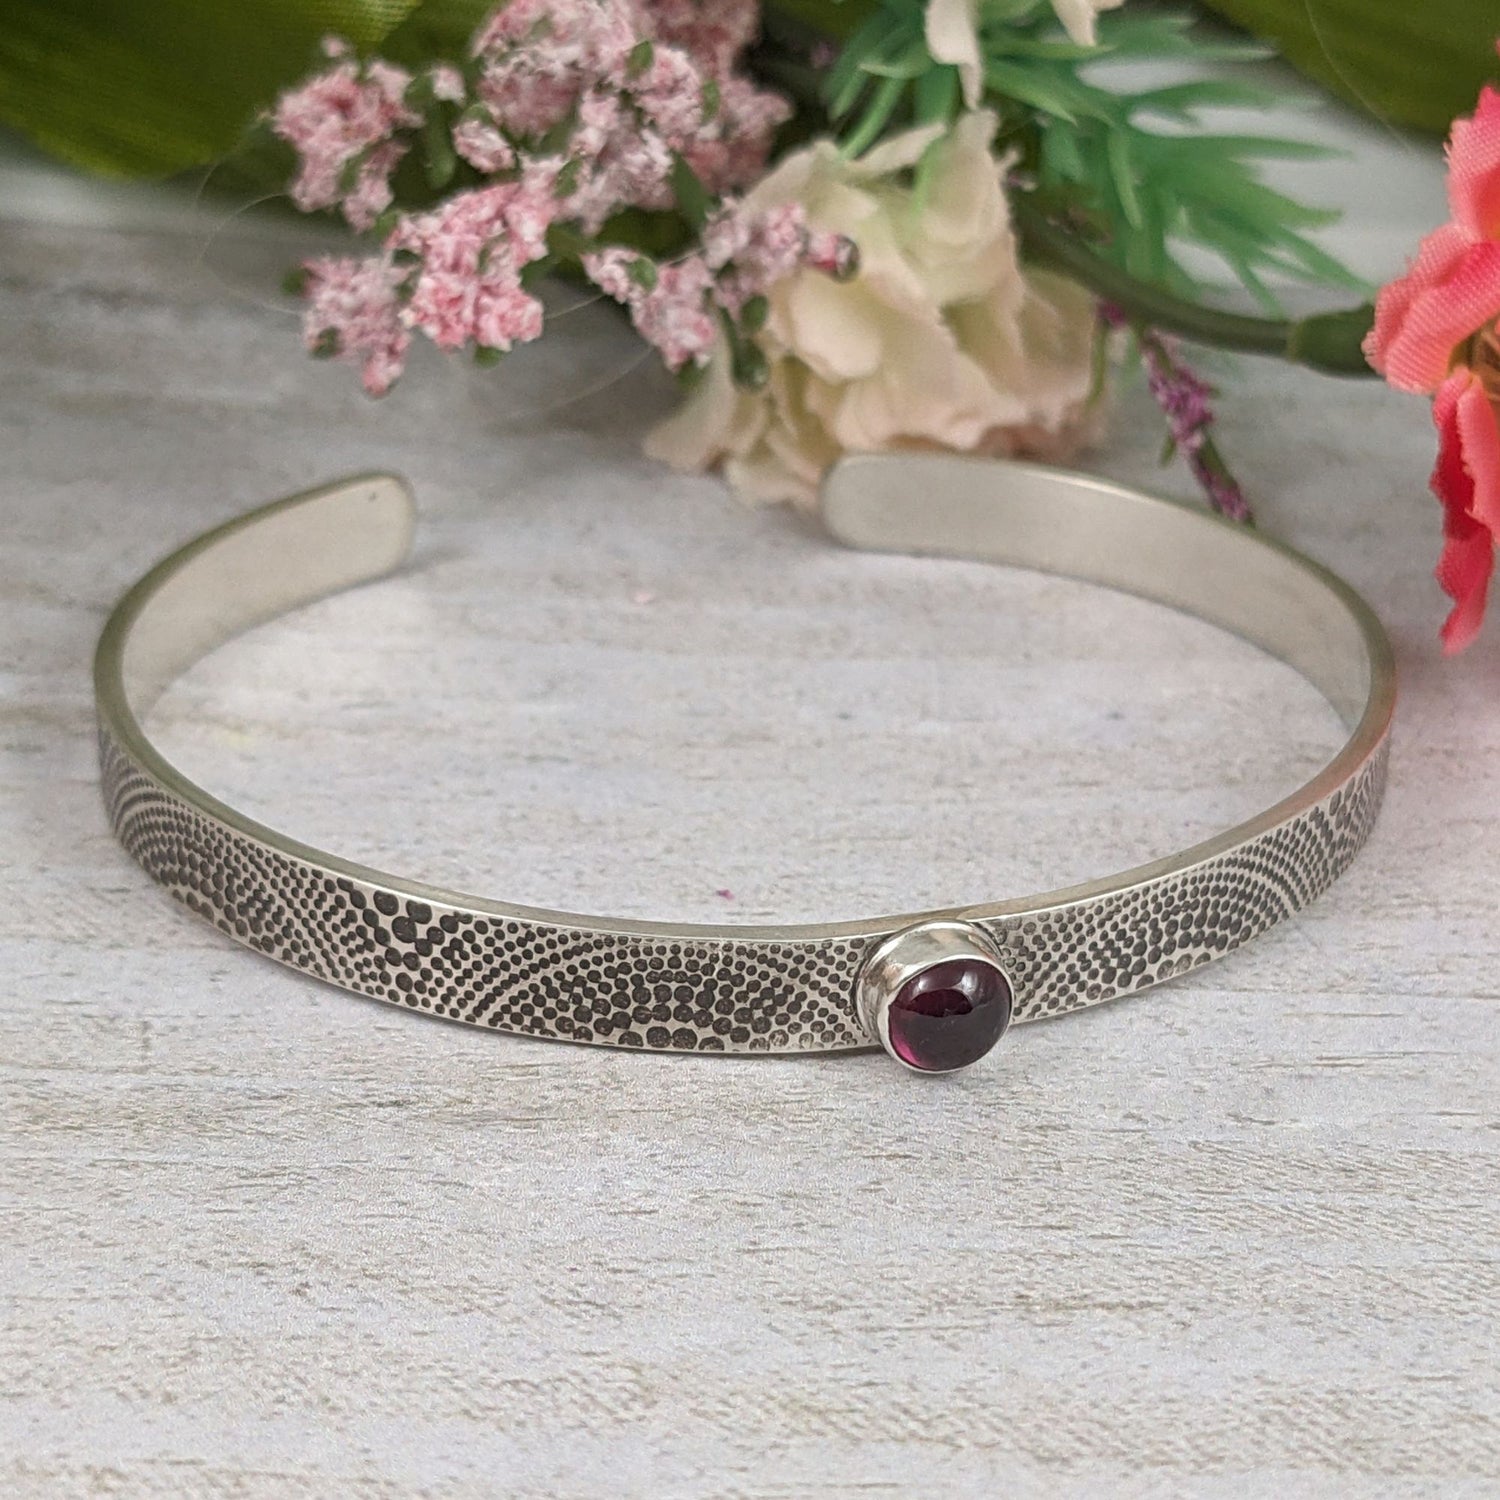 Narrow sterling silver cuff bracelet. The silver is covered with an arch pattern. In the center is a red garnet gemstone. Staged with flowers in the background.